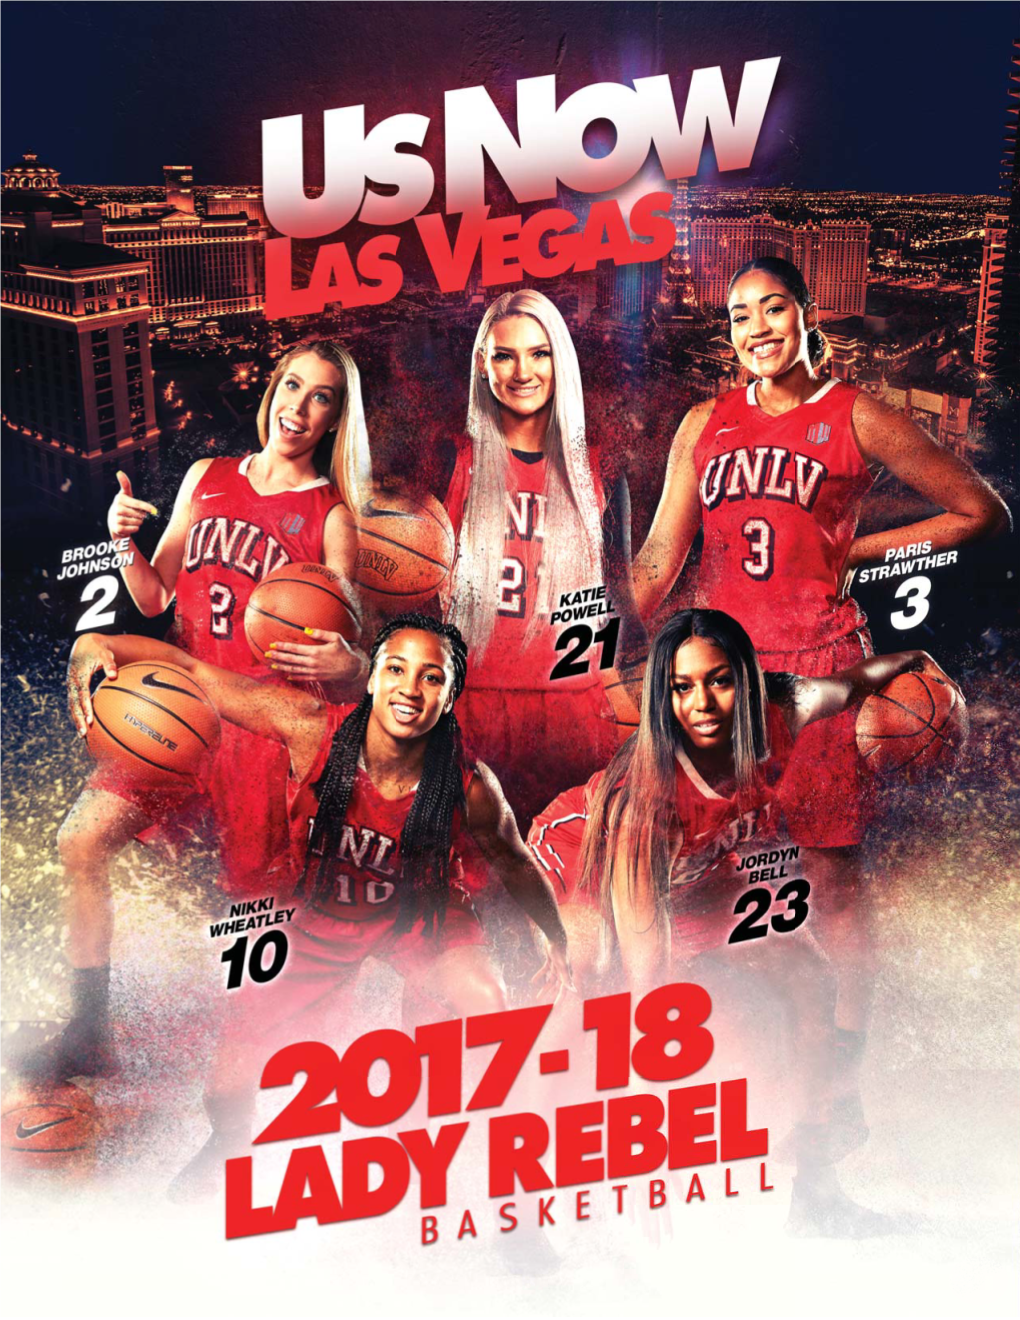 2017-18 WBB History Section.Indd